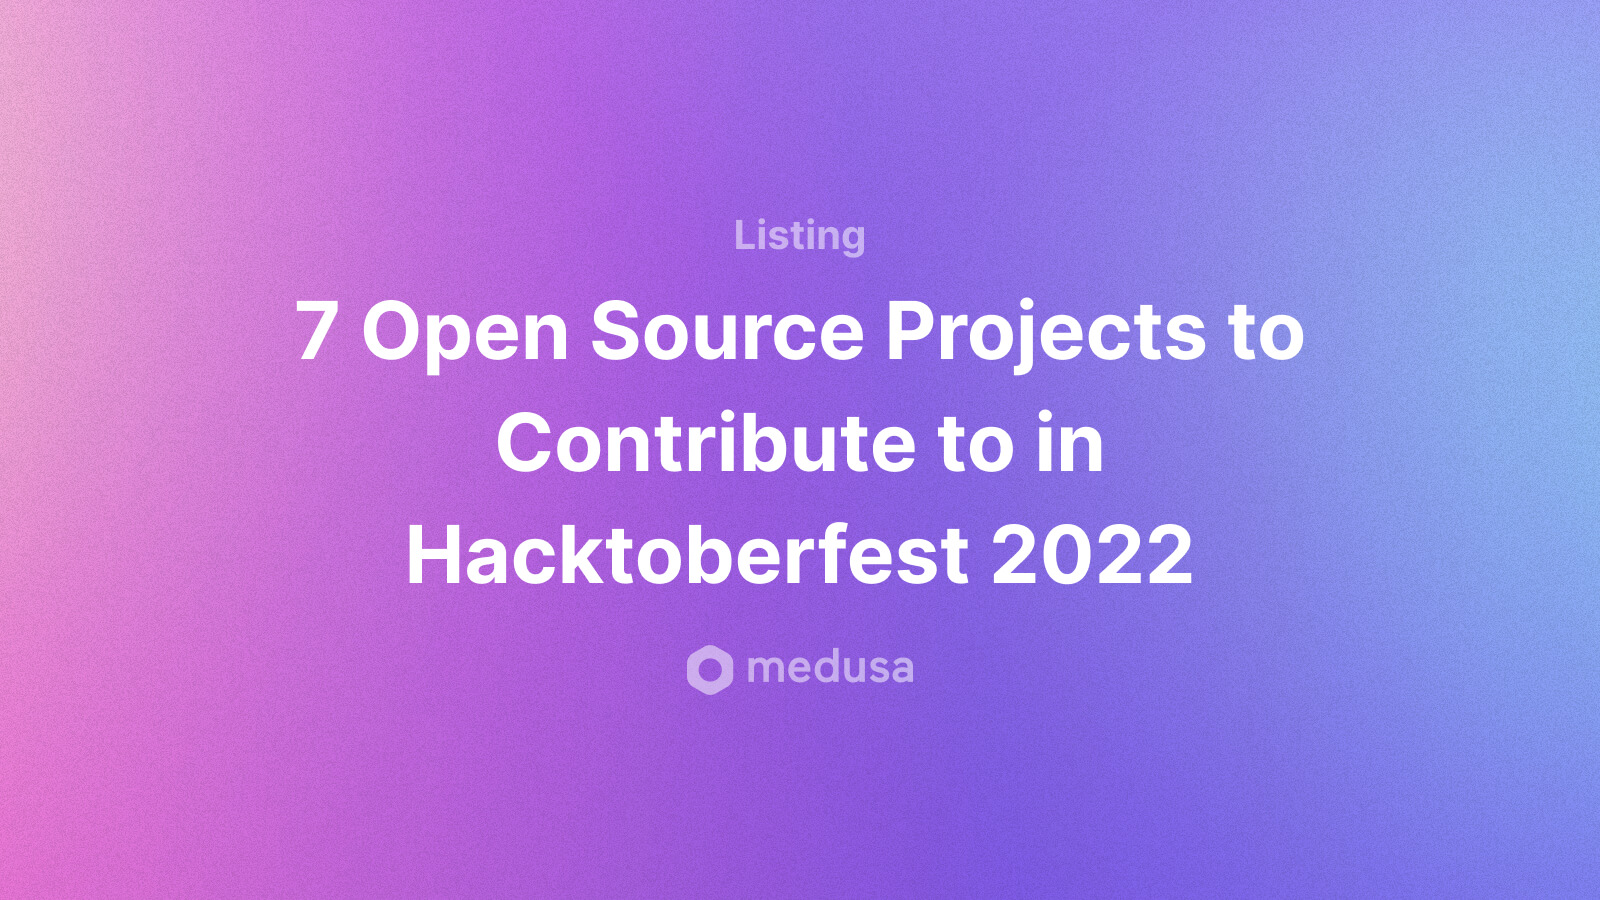 7 Open Source Projects to Contribute to in Hacktoberfest 2022